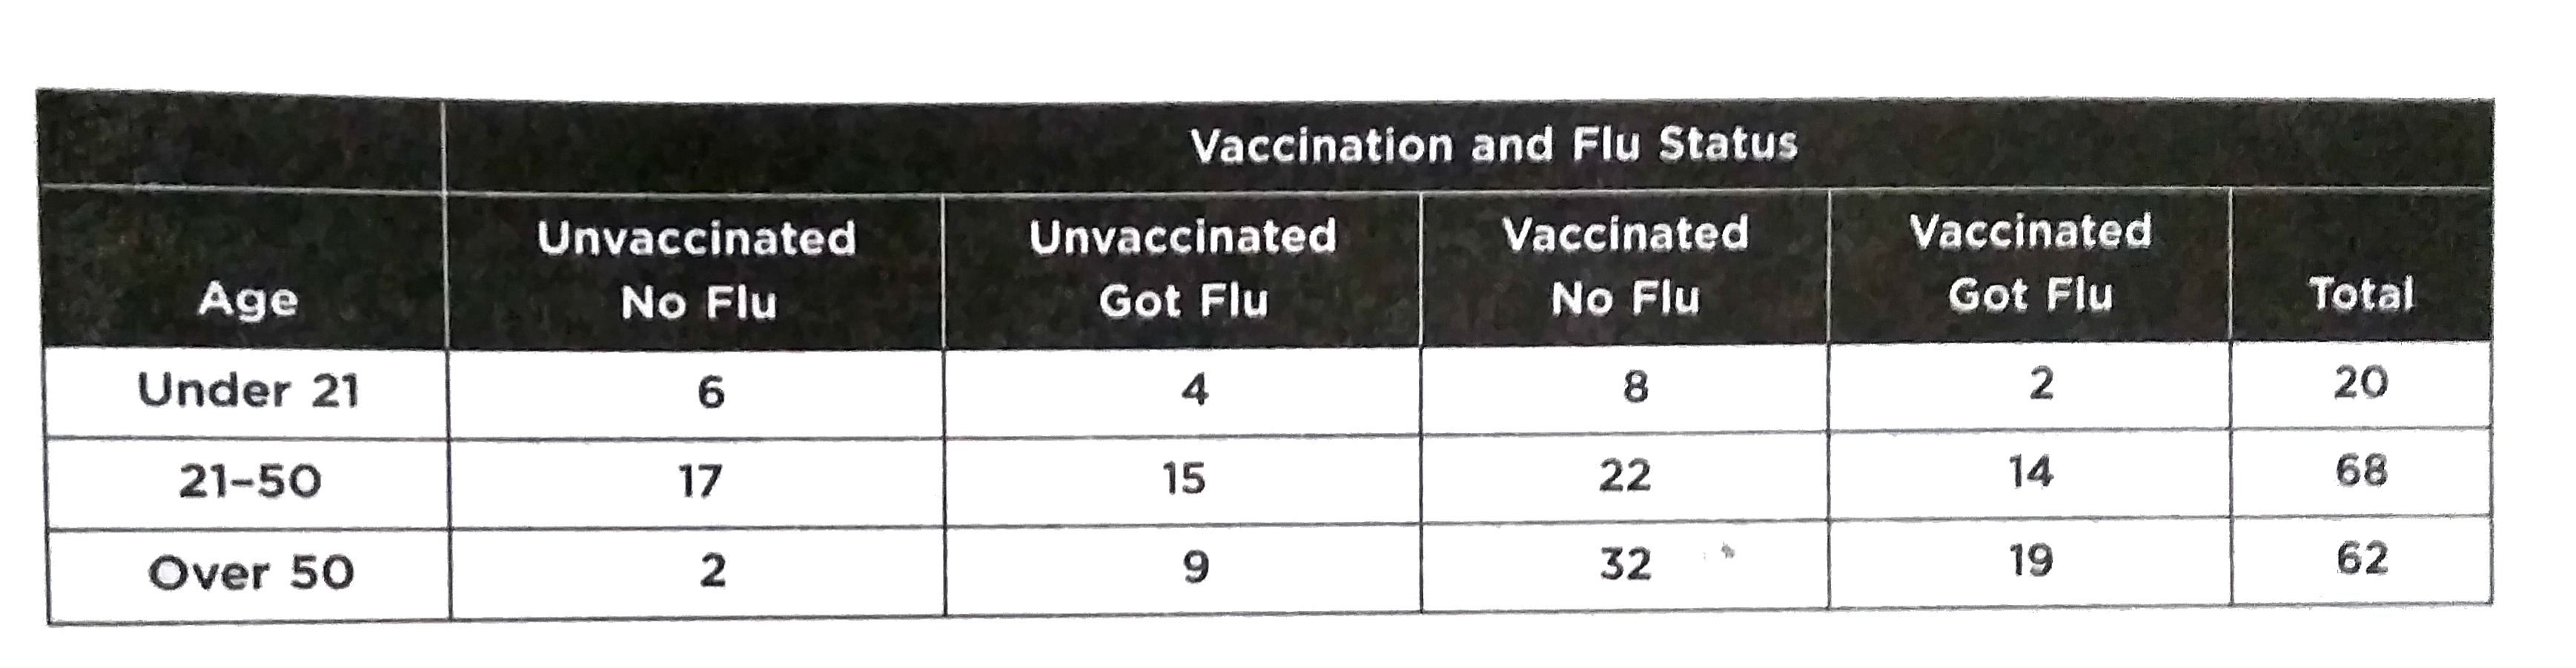 The table above summarizes the result of a survey taken at the end of last year's flu seson. What fraction of the people who got the flu were unvaccinnated?